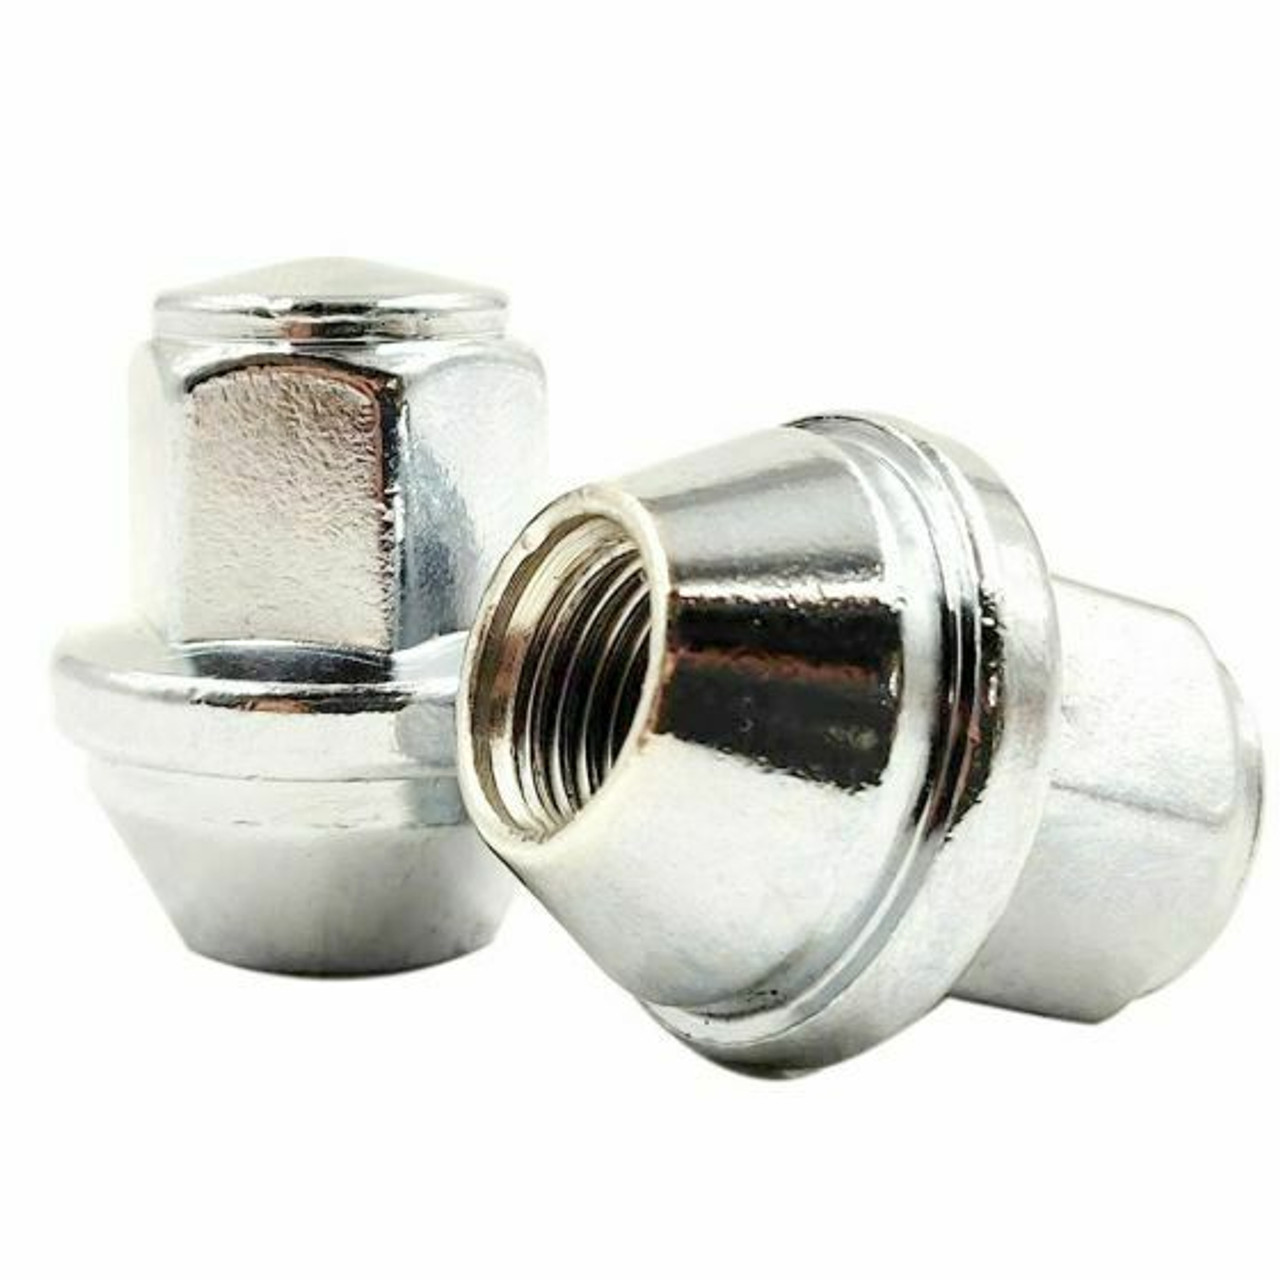 Stock OEM Factory Style - Lug Nut - Ford (13/16) M14x1.5